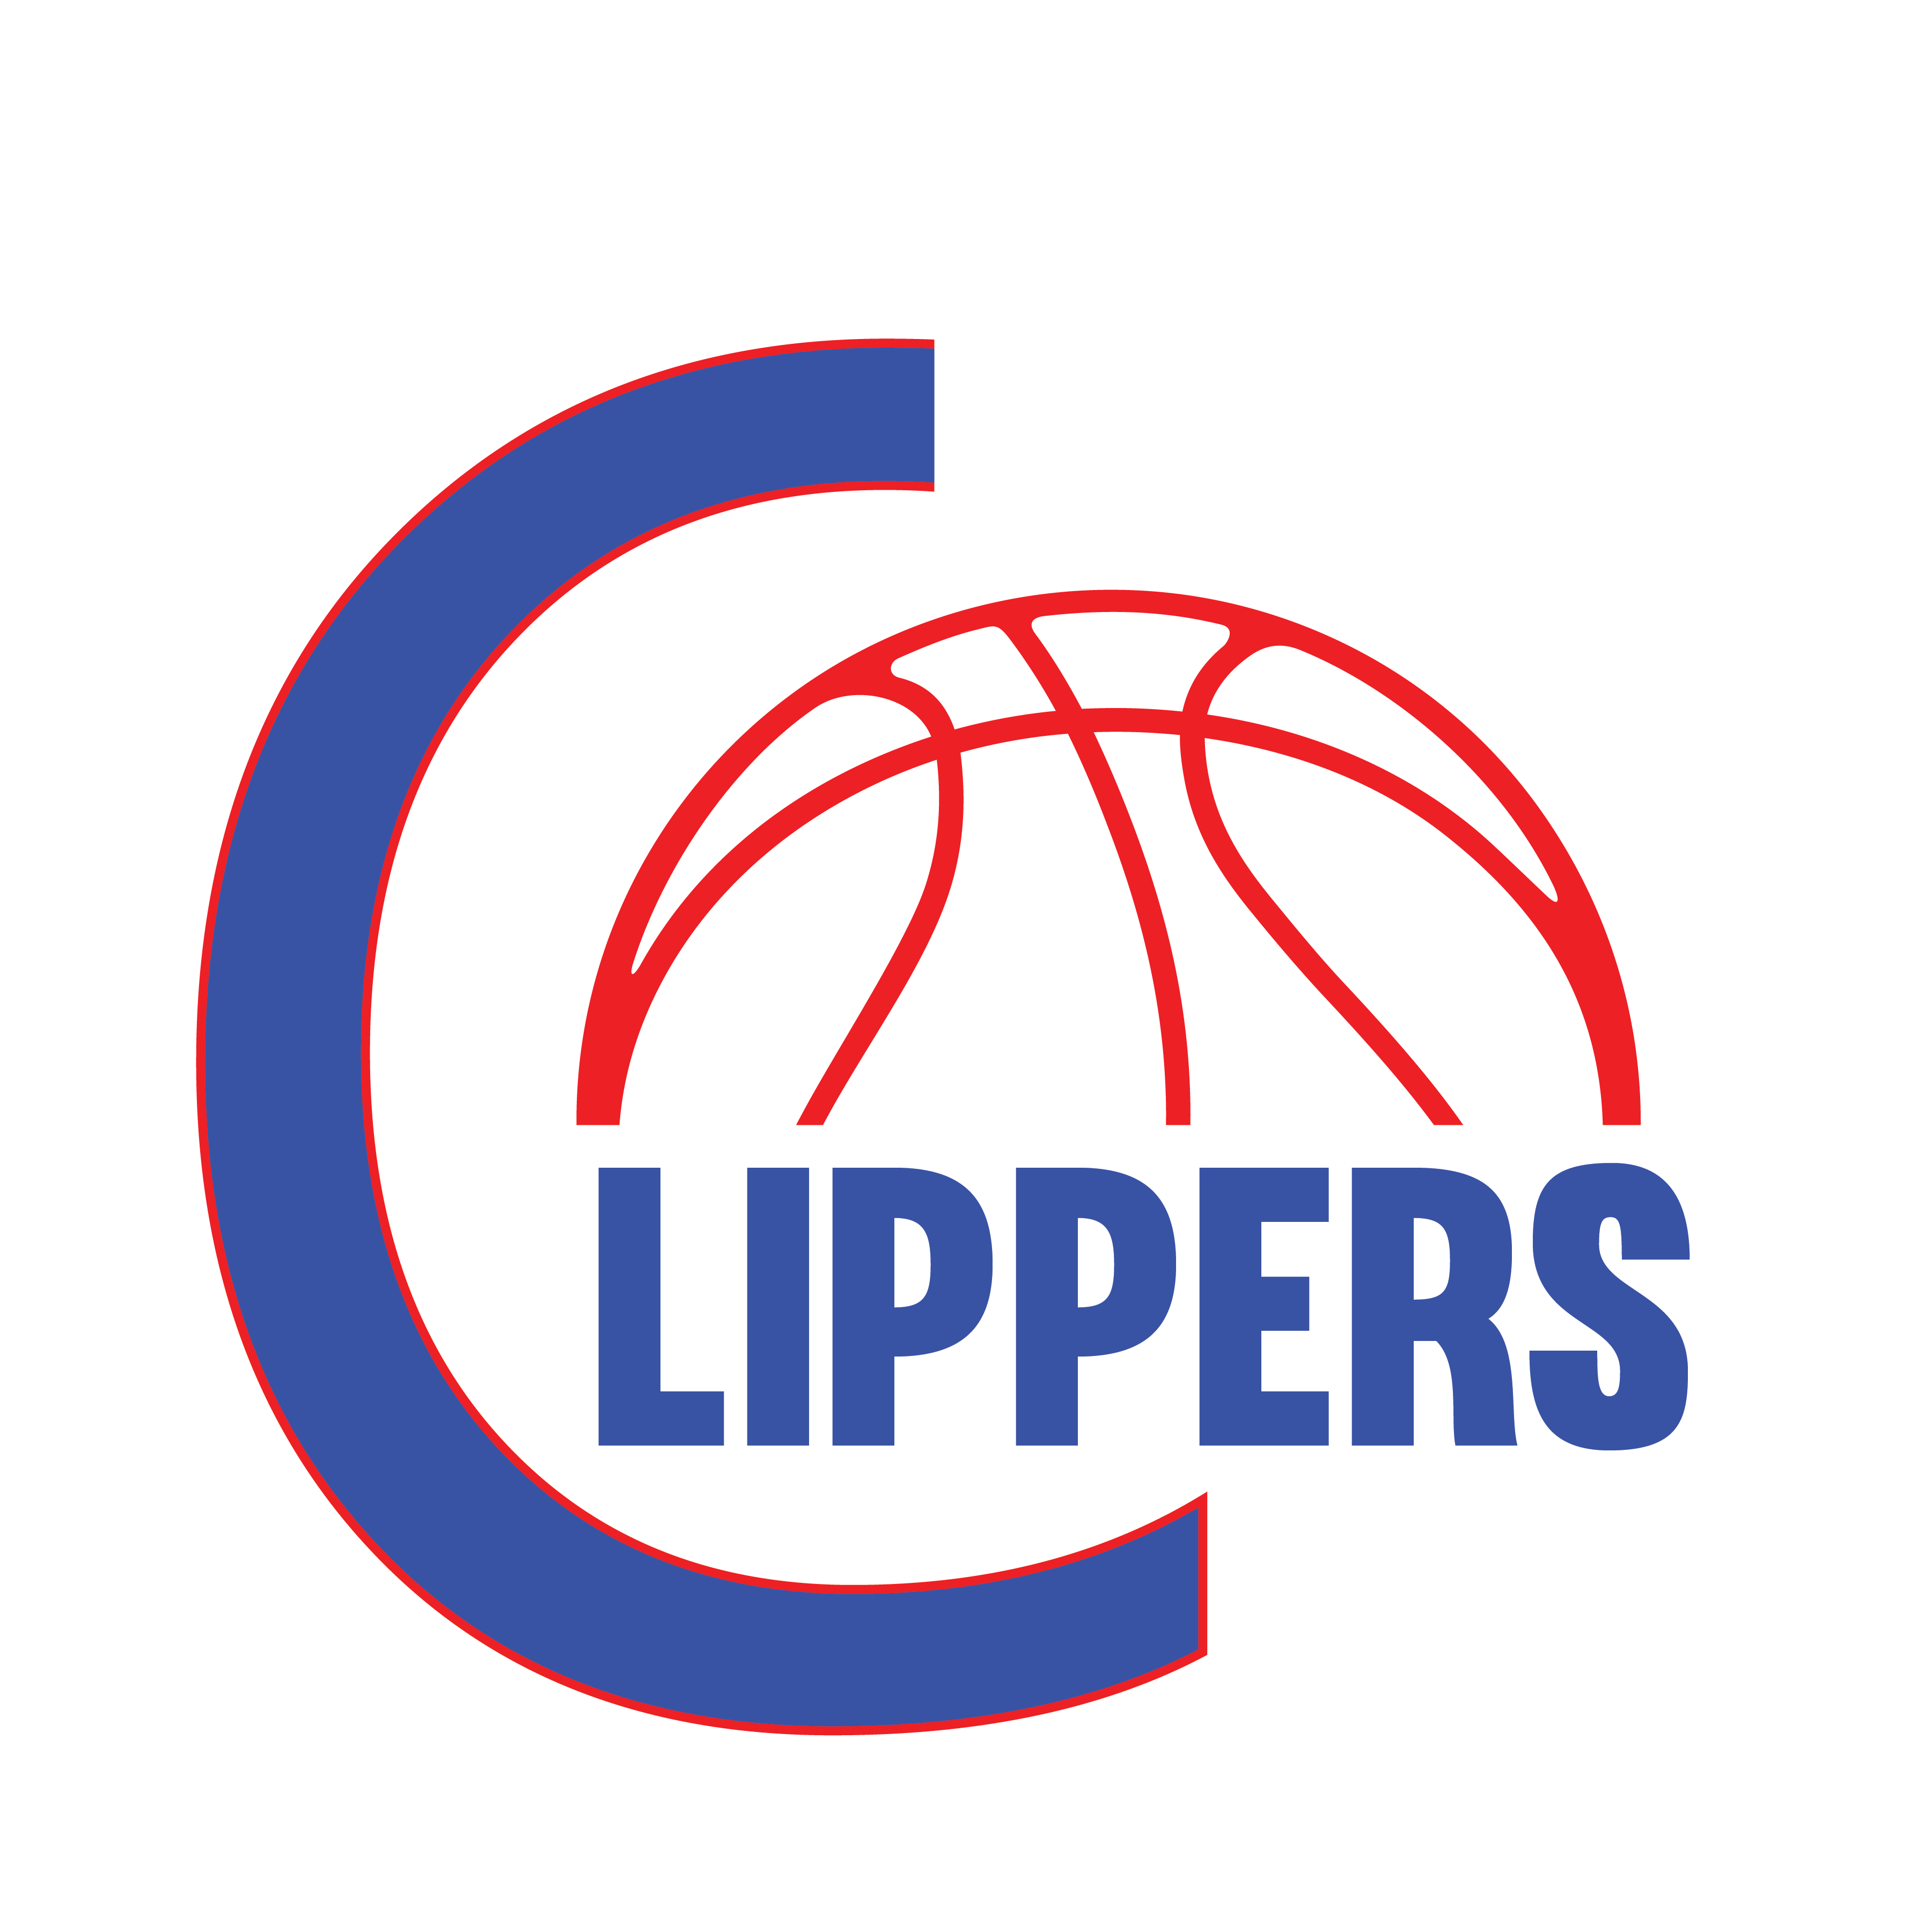 Los Angeles Clippers - Wikipedia